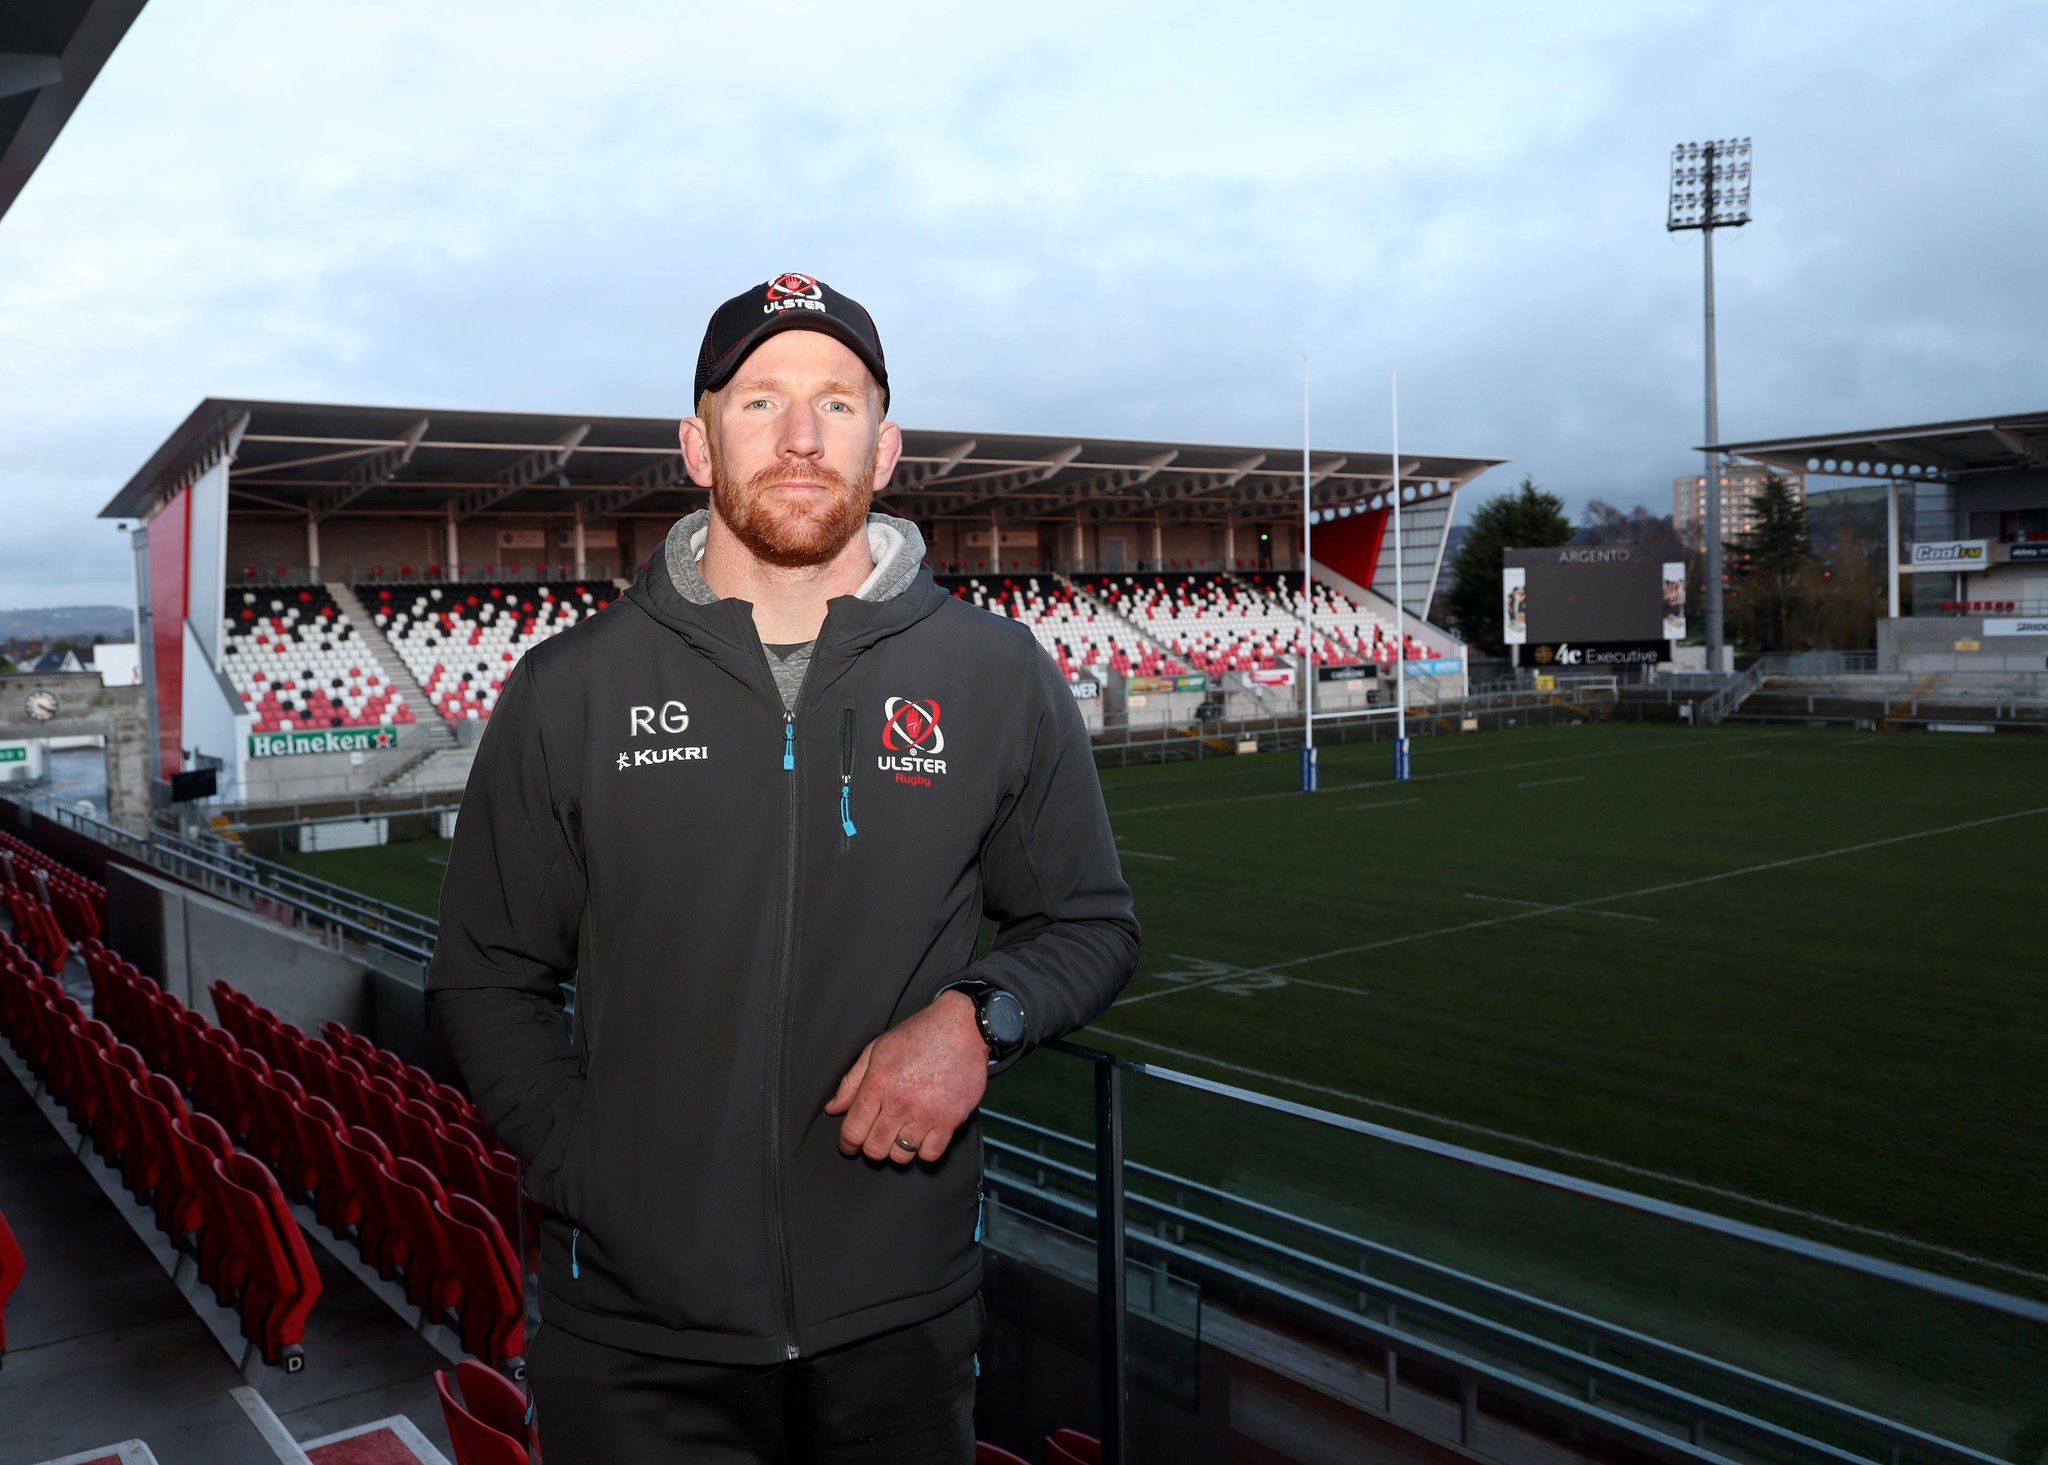 Ulster's focus back on league push